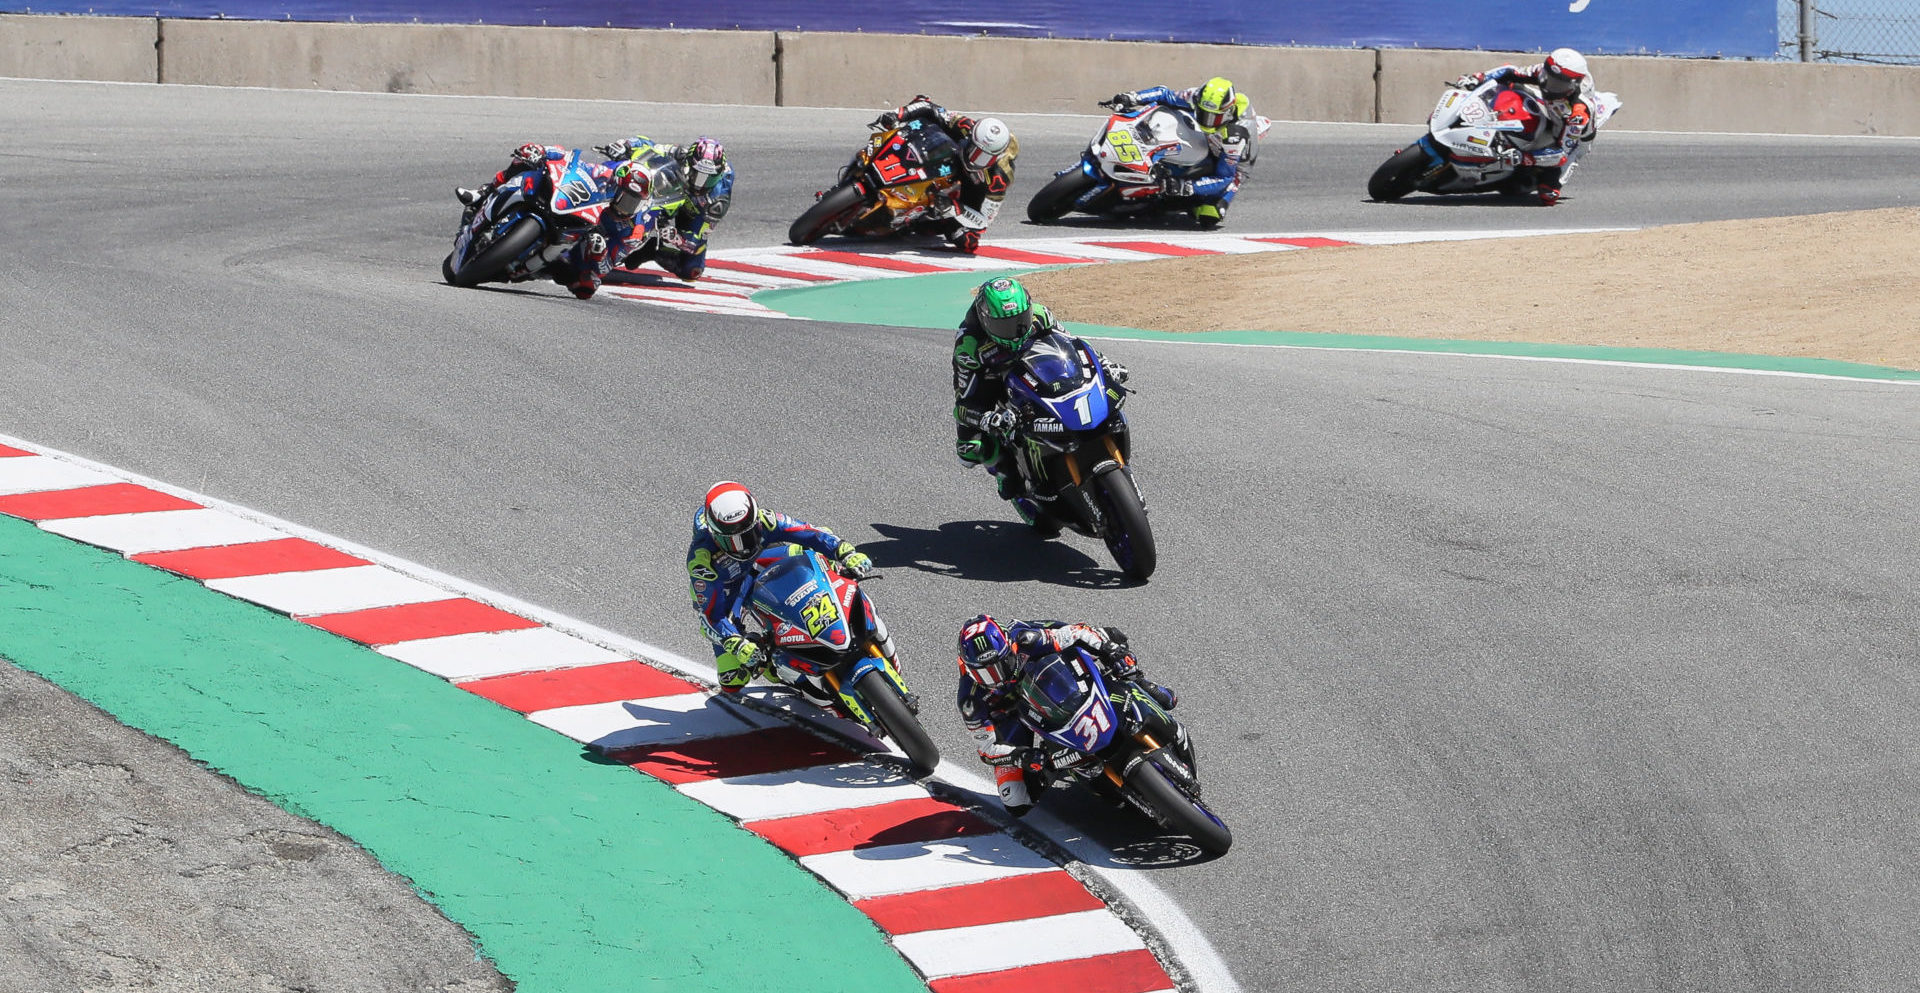 MotoAmerica 2020 FOX Sports Continues Live Coverage Of Superbike Races, Adds Junior Cup